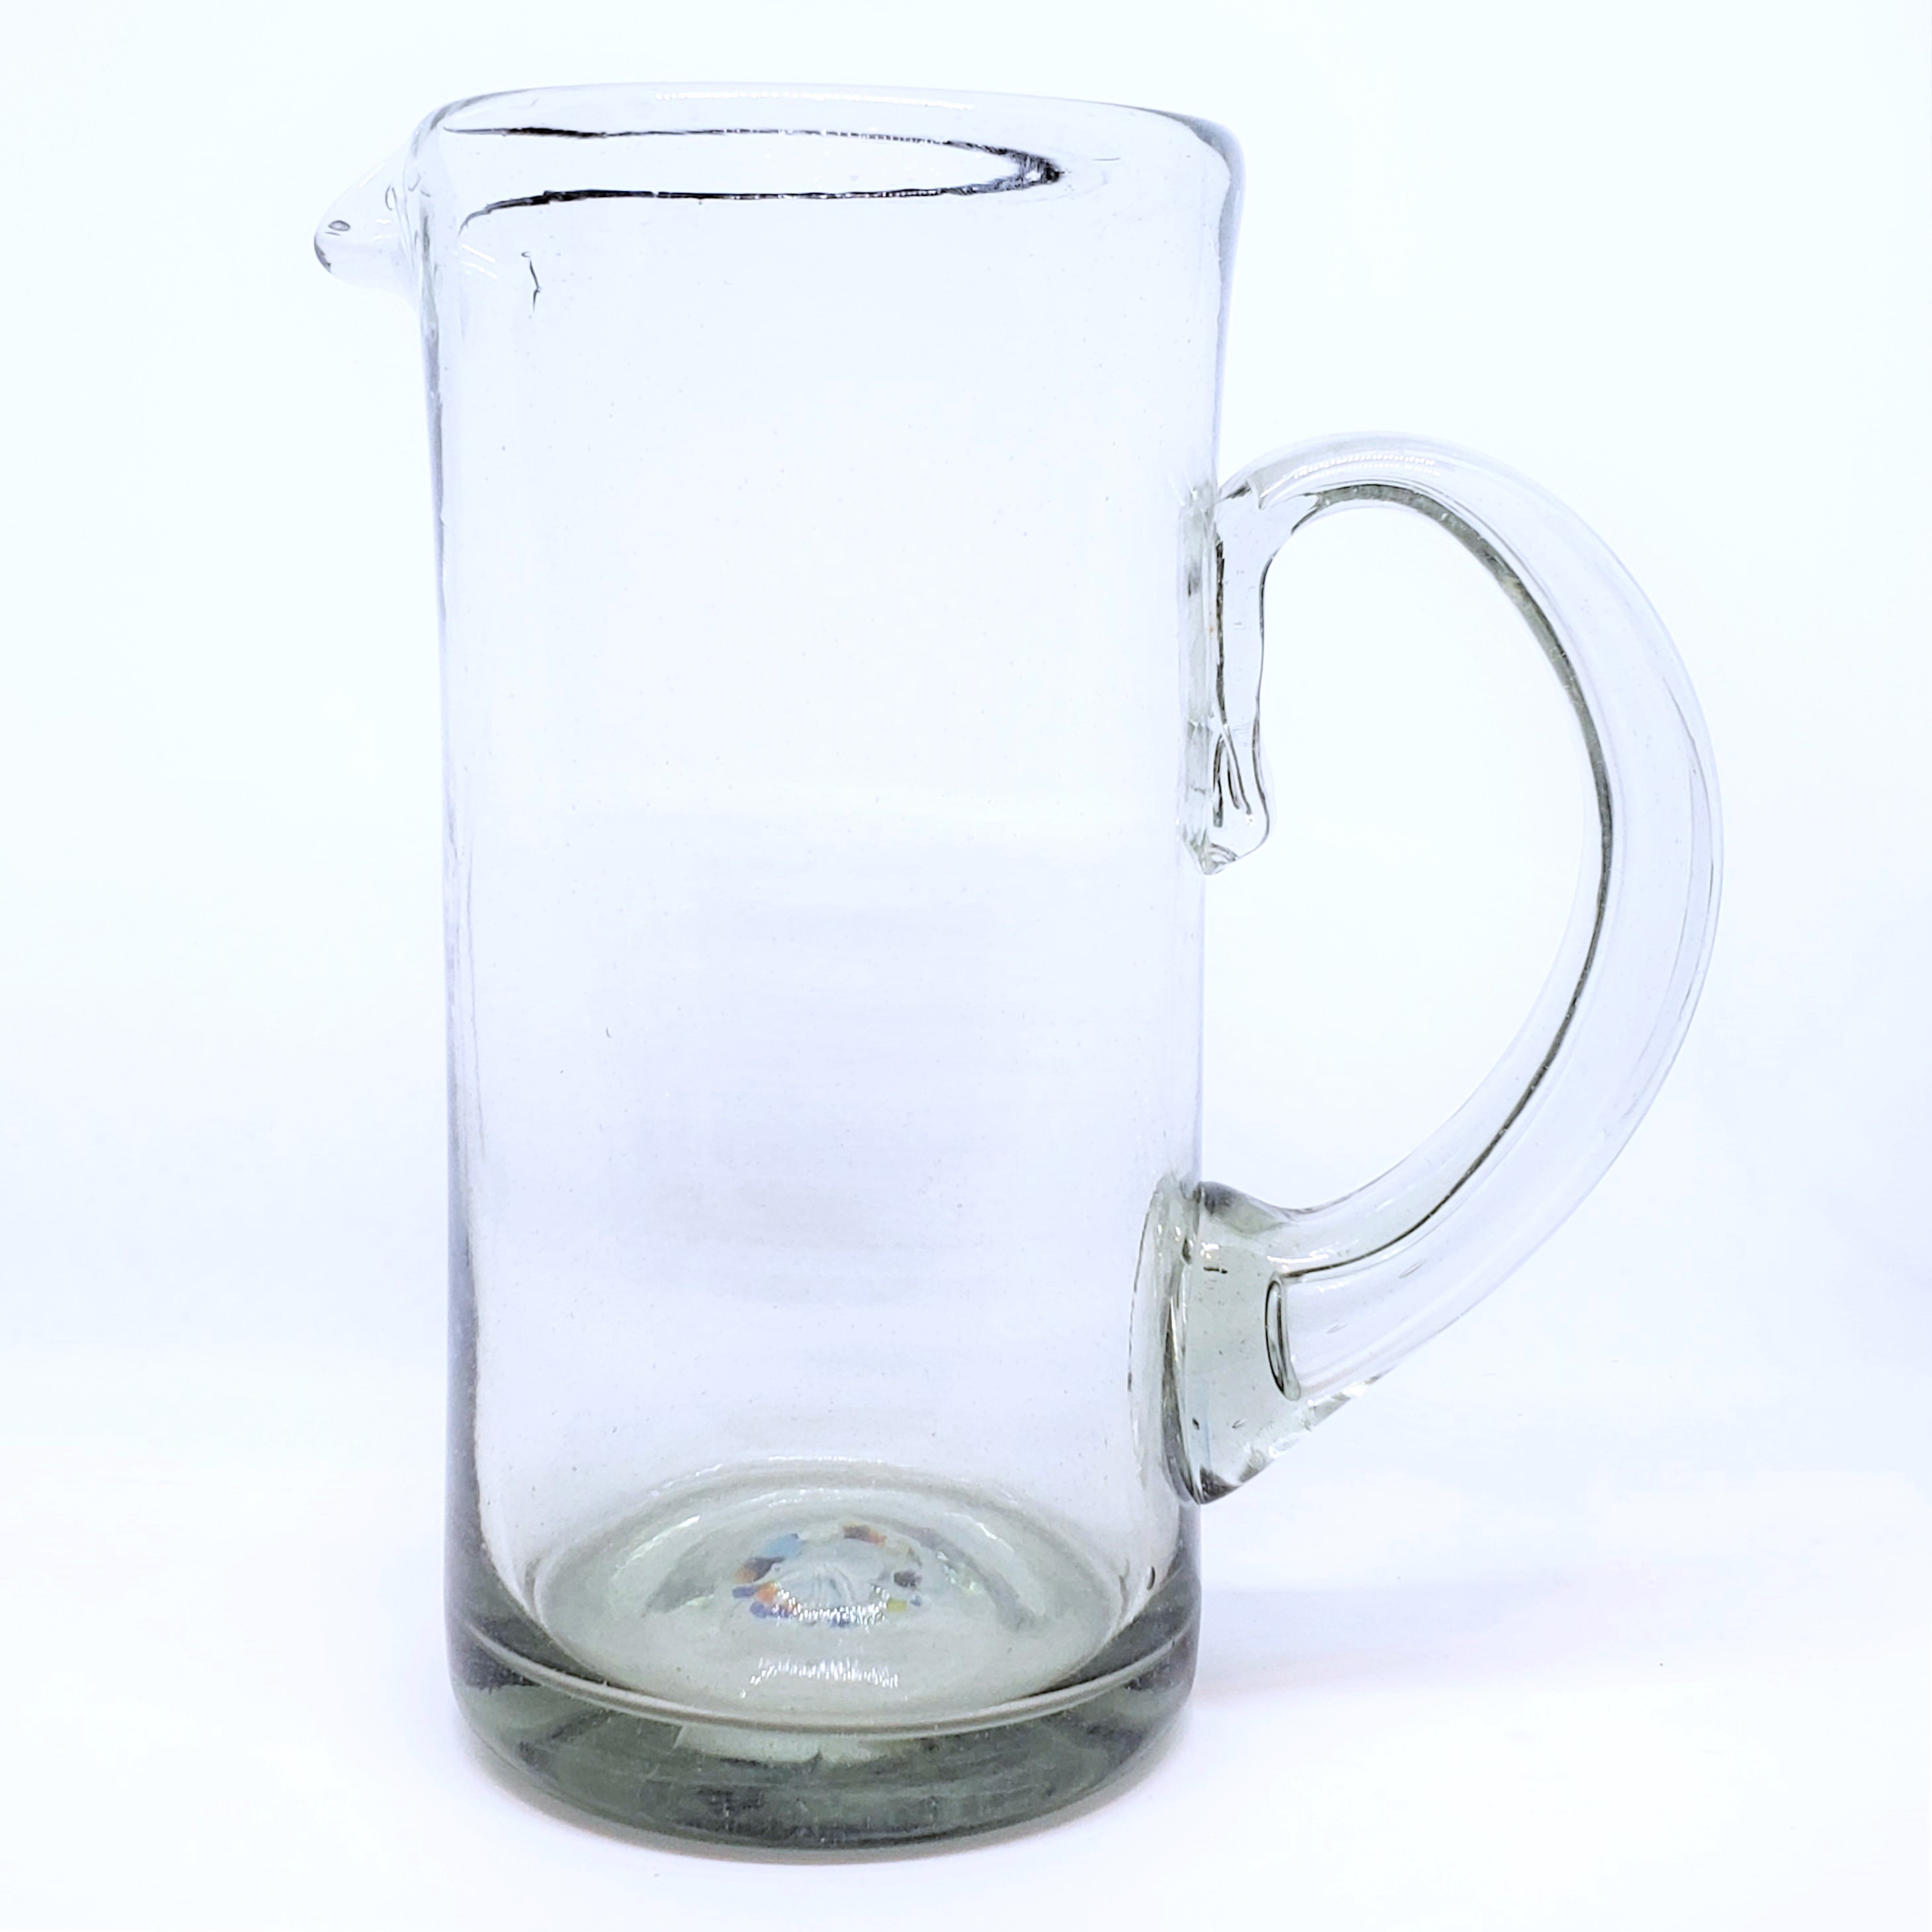 Wholesale Colored Glassware / Clear 60 oz Tall Pitcher / Match your clear tumblers and glasses with this gorgeous rustic clear tall pitcher.